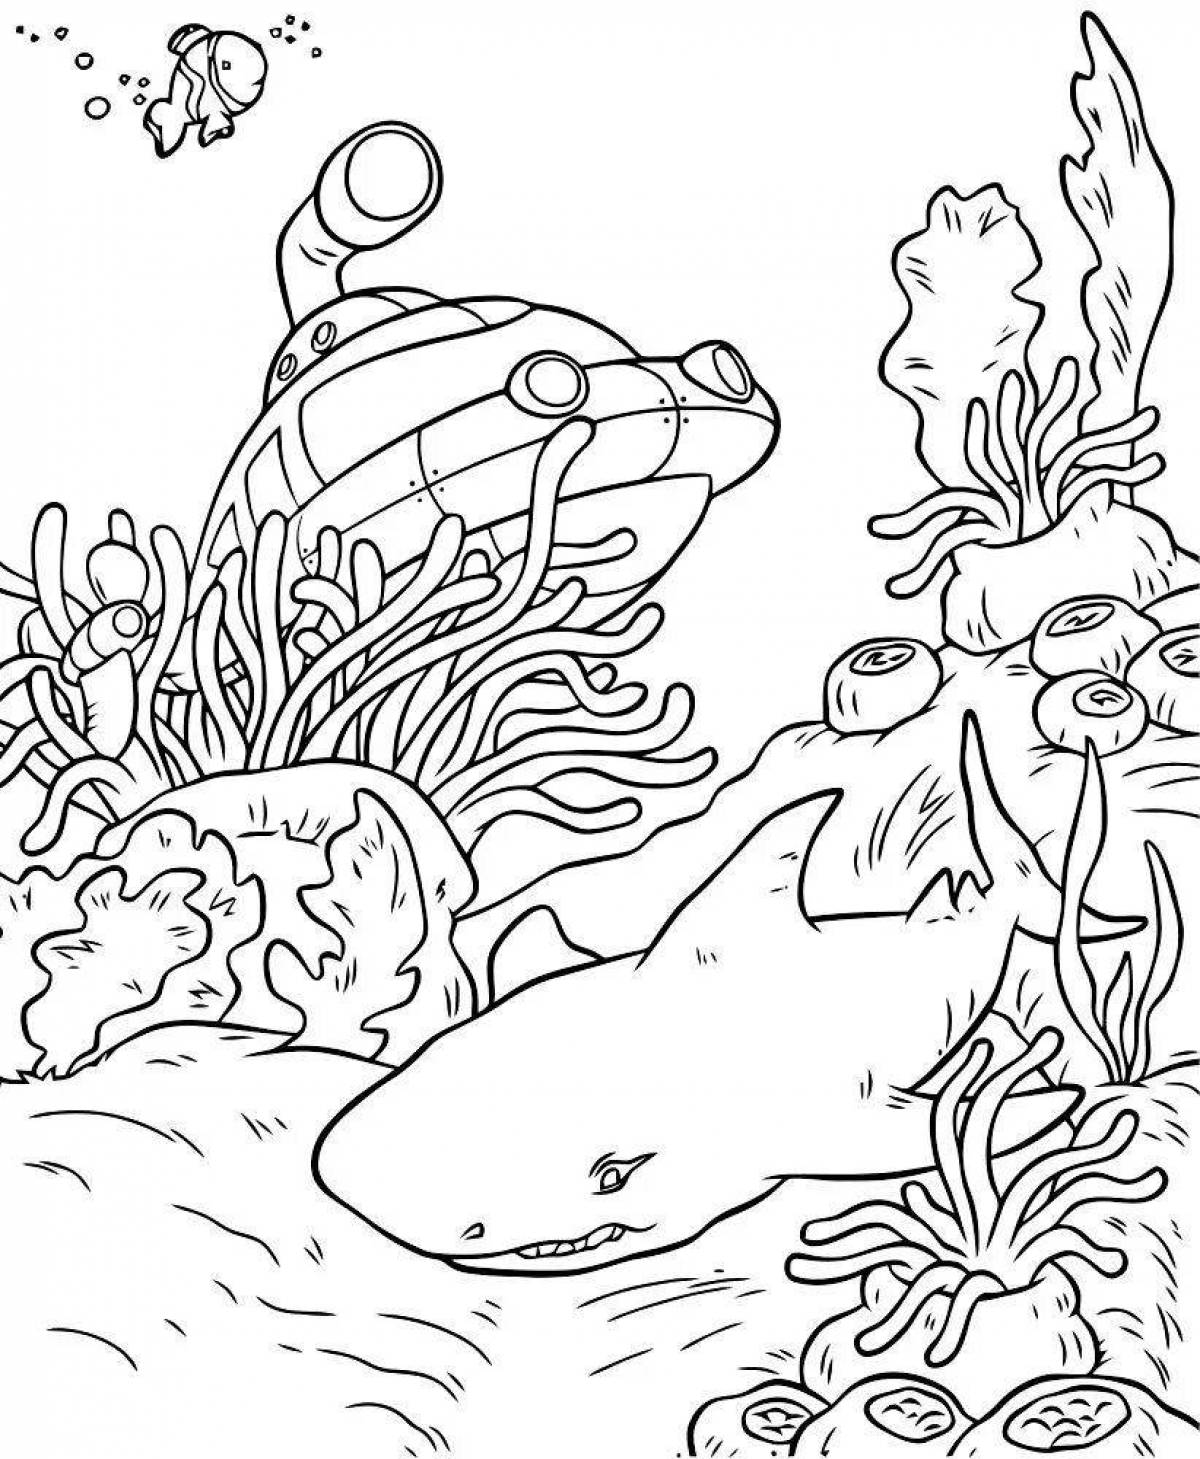 Coloring book exotic underwater world